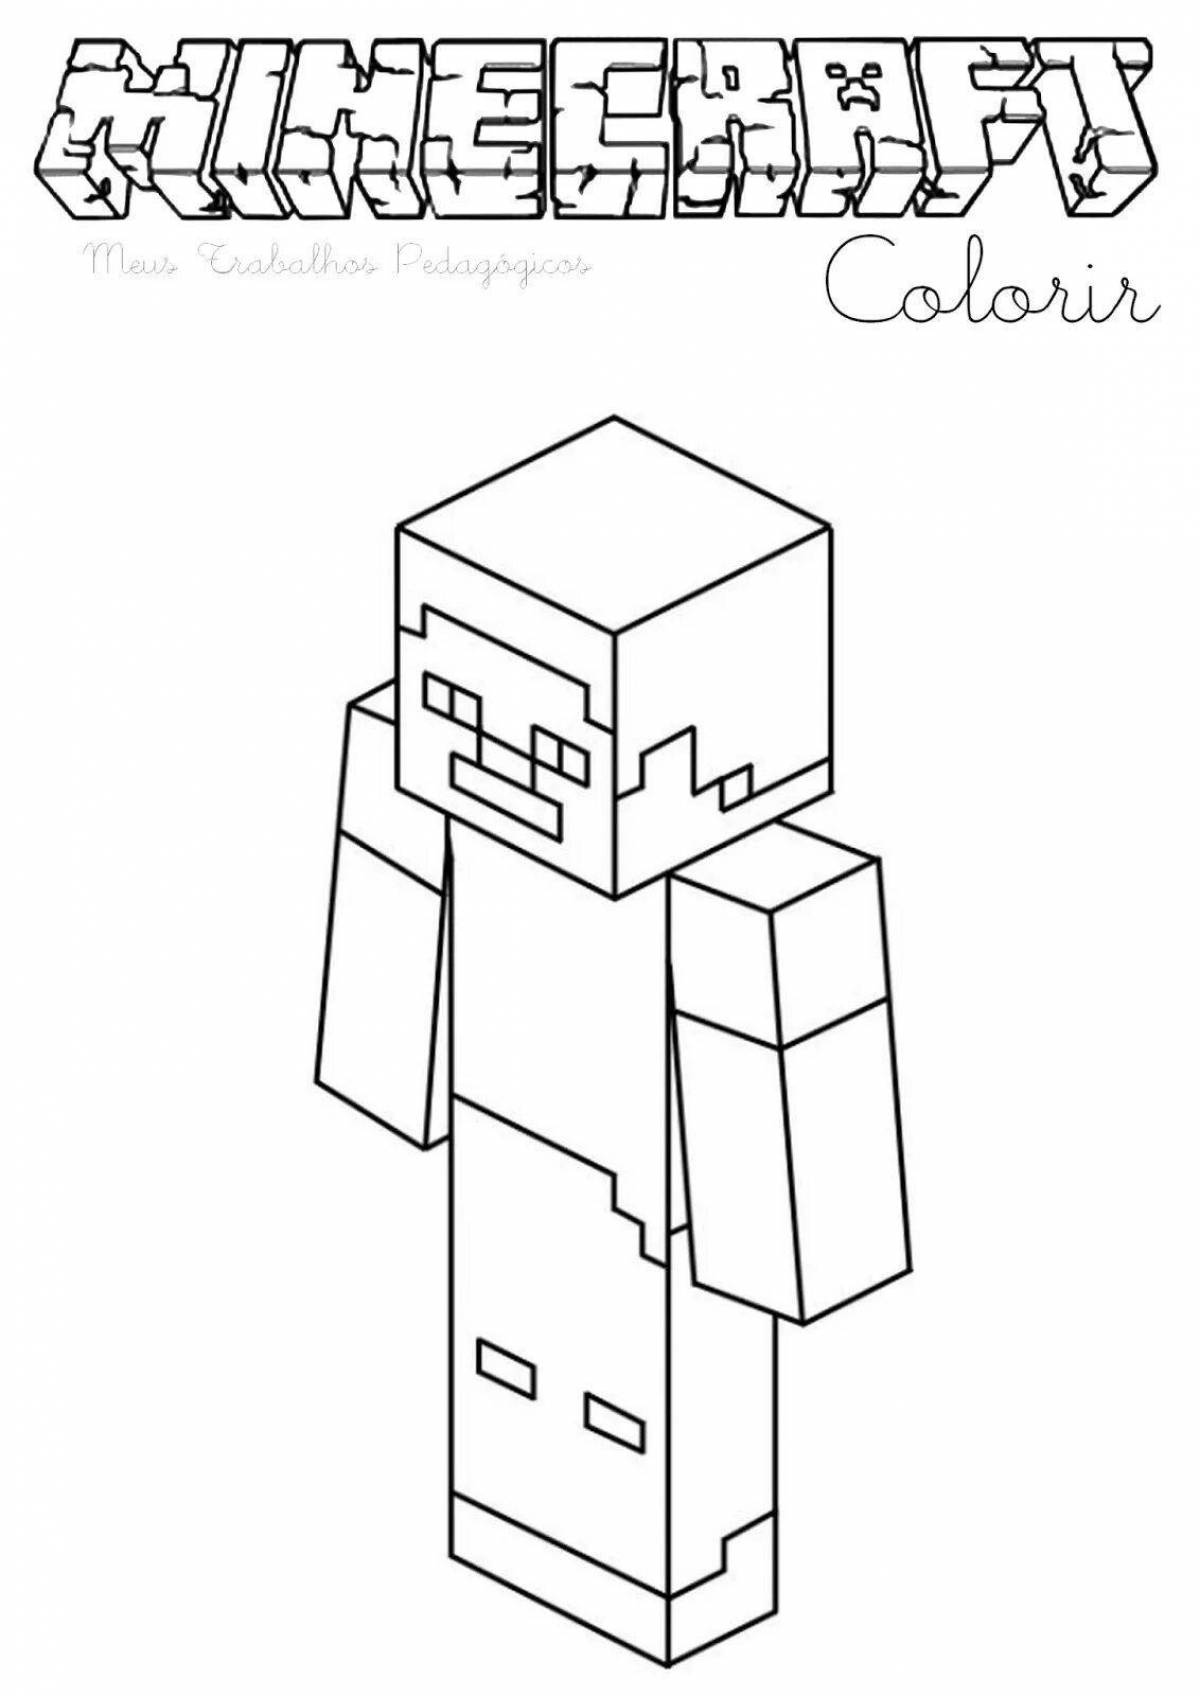 Live minecraft cake coloring page